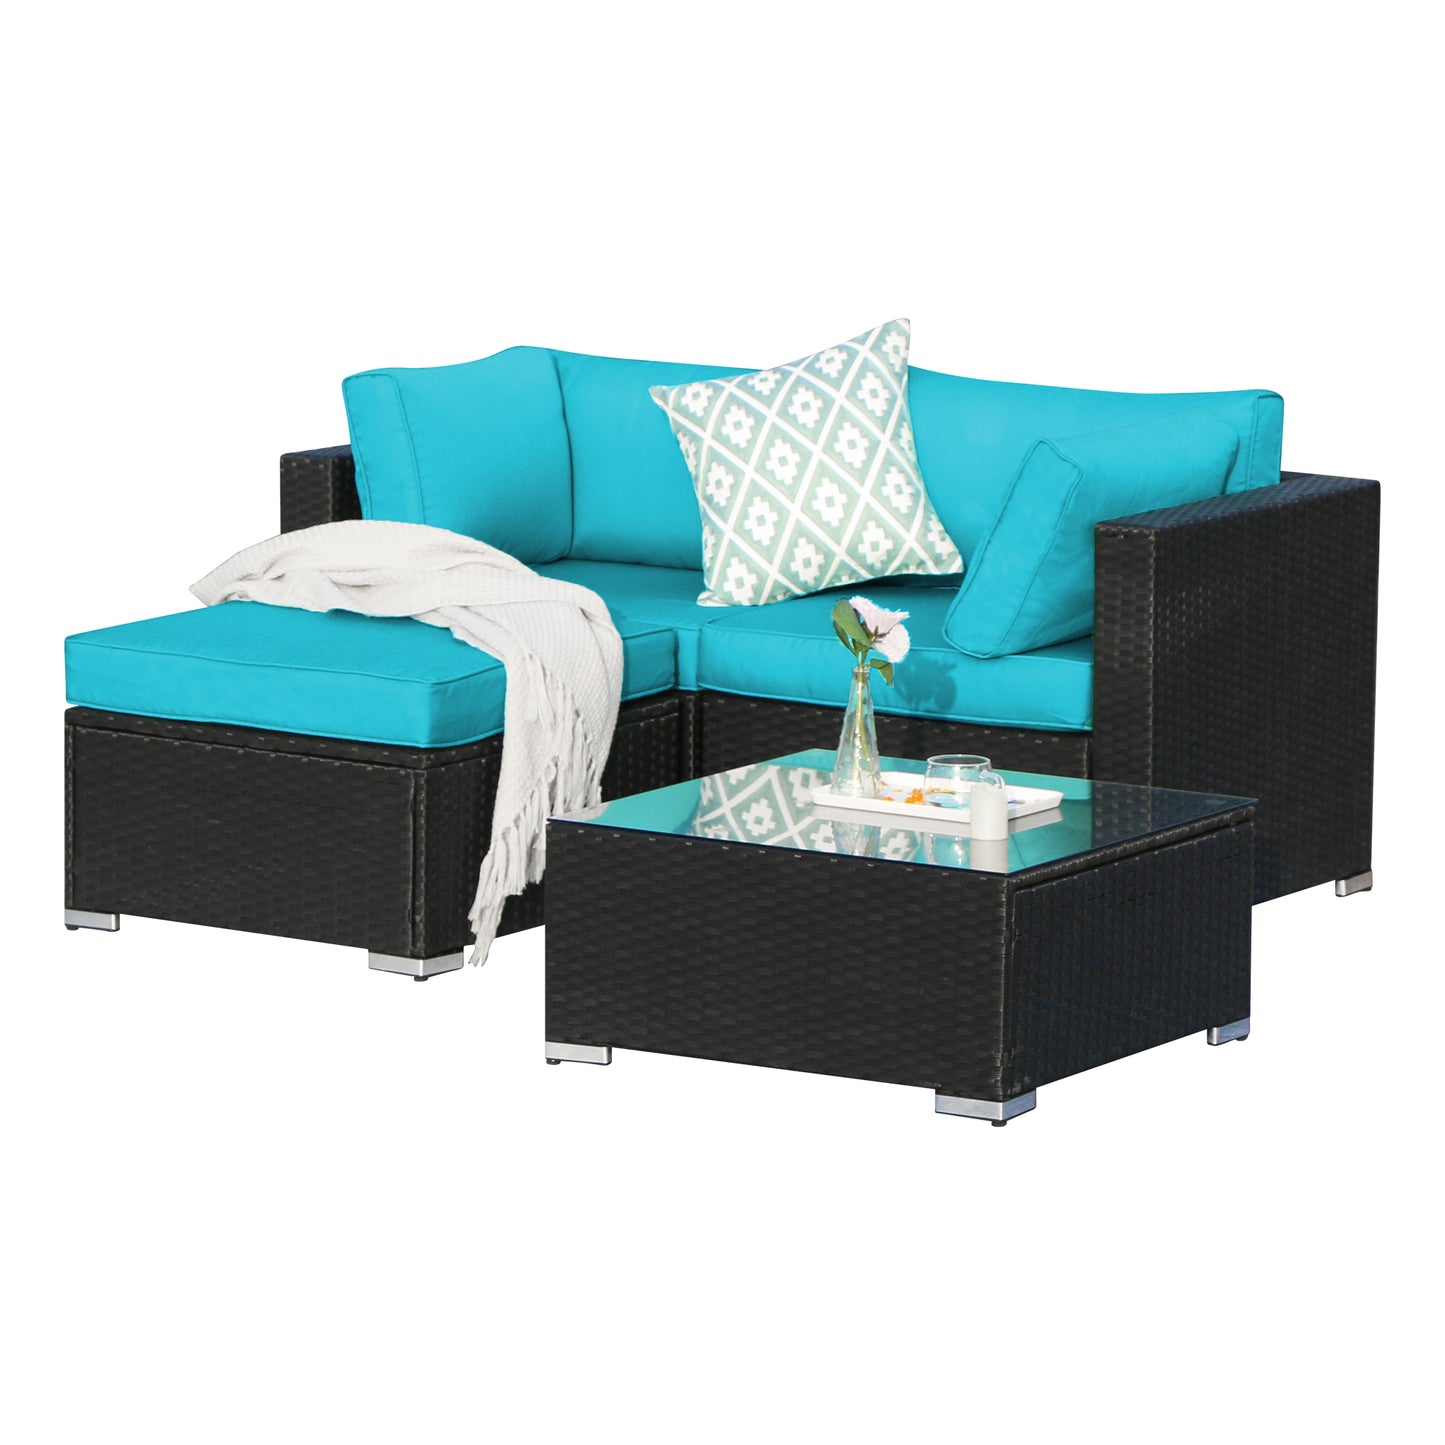 4 Piece Loveseat Set All Weather Ottoman and a Coffee Table, Turquoise Cushions - Sunvivi